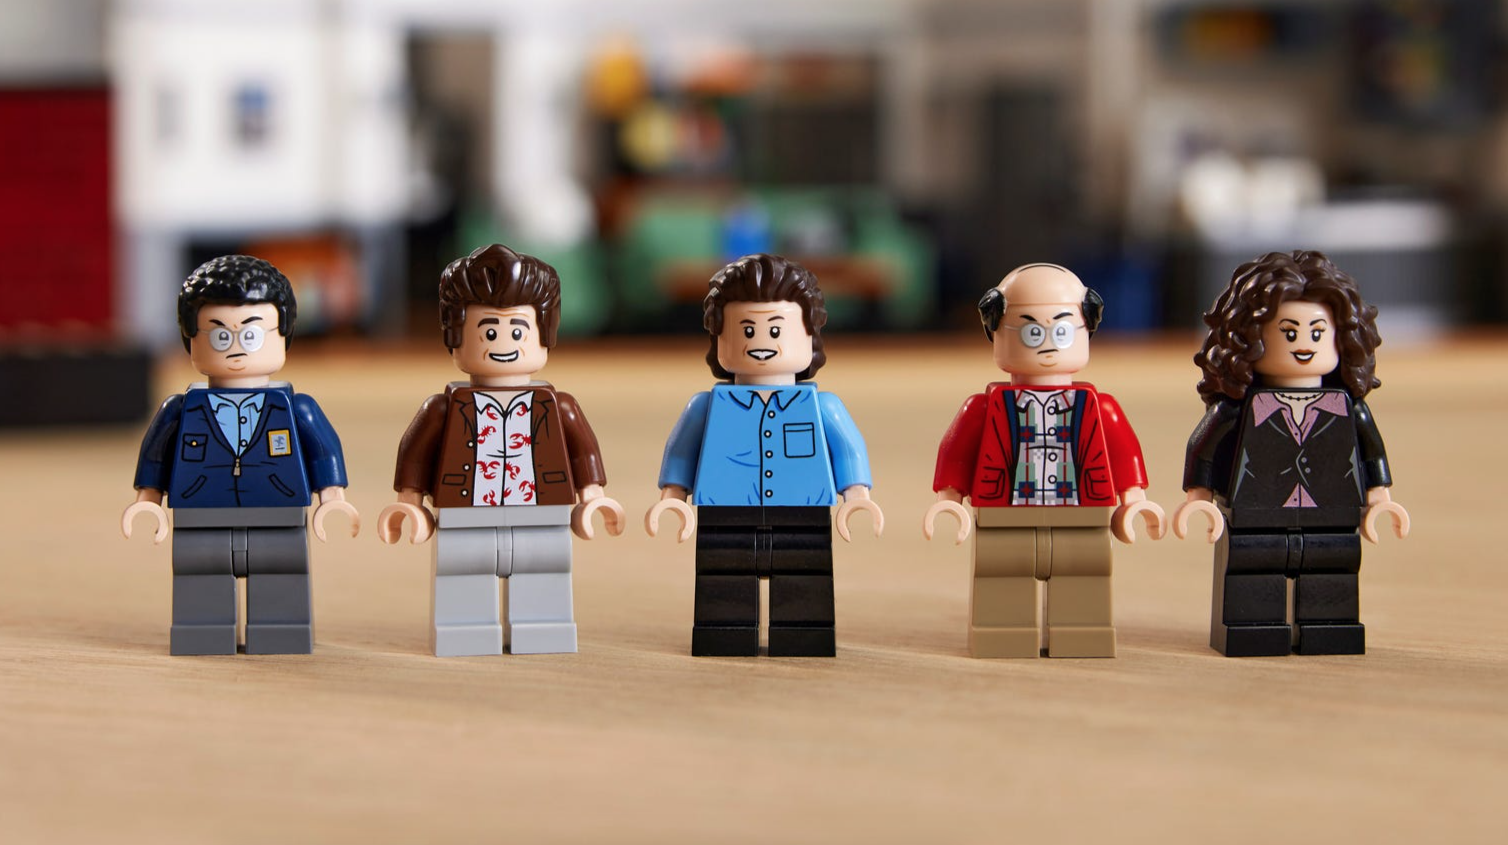 Leave room on your Festivus list this year for the Seinfeld Lego set